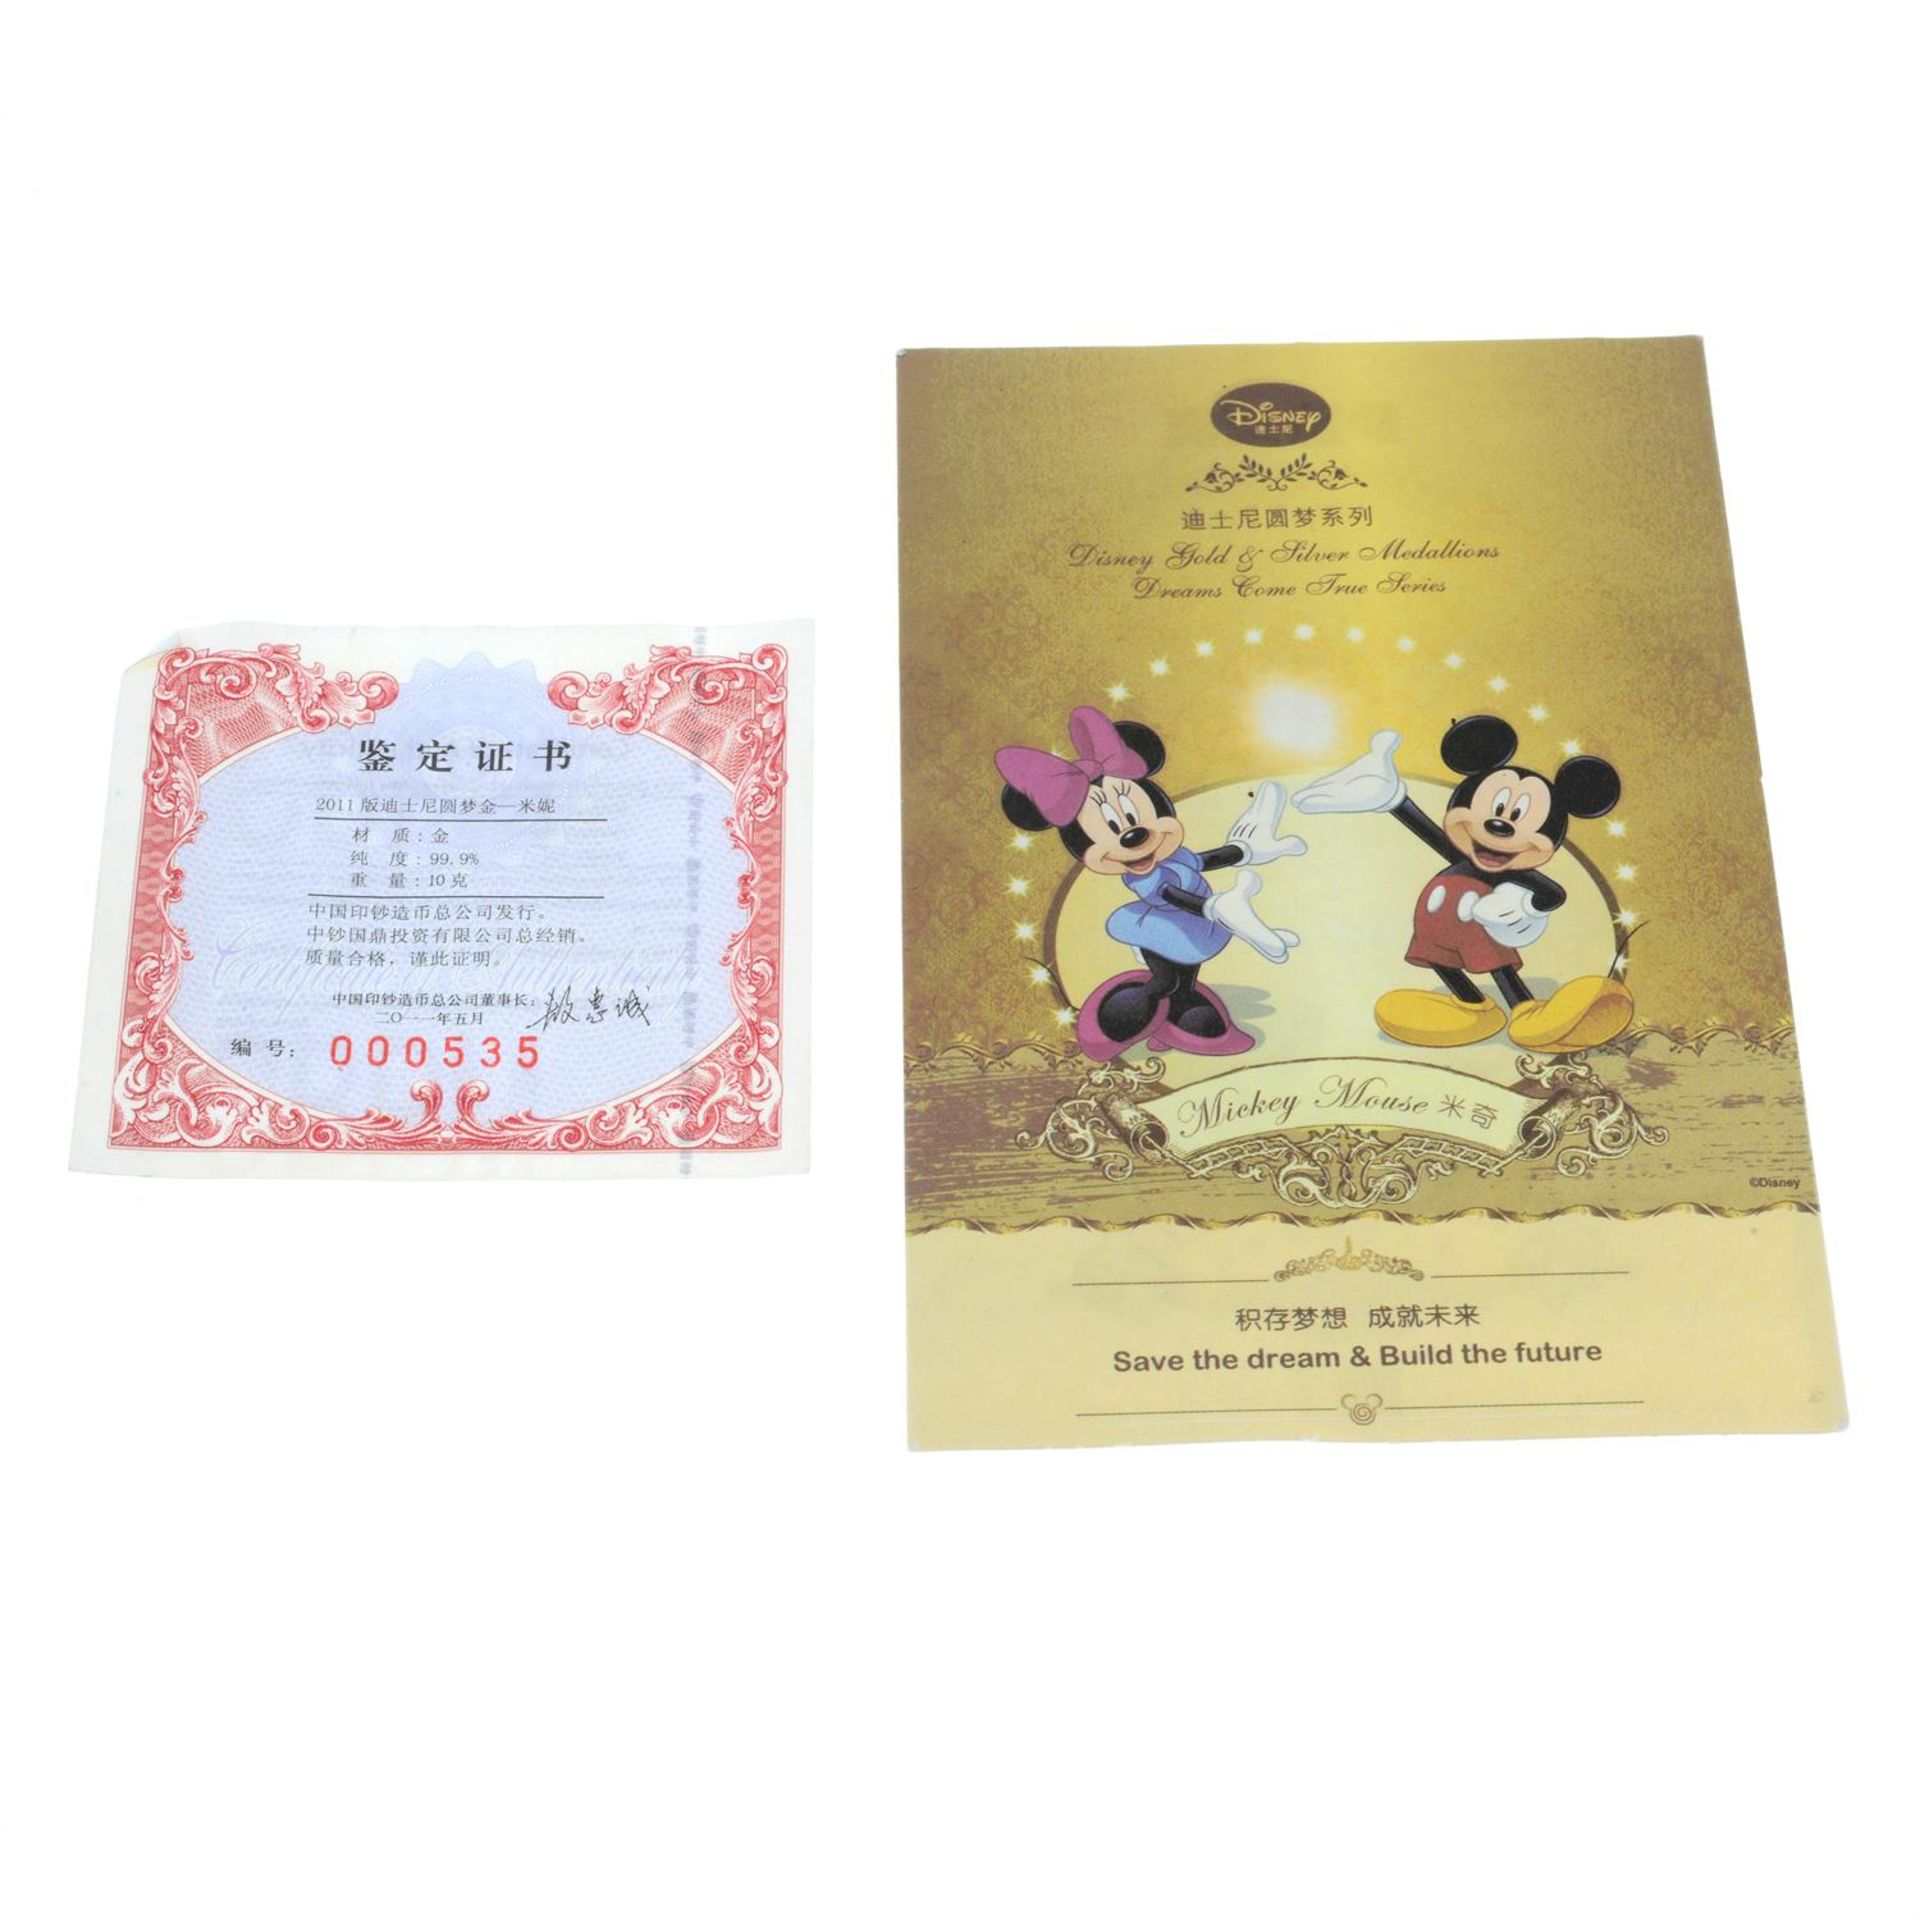 China, Disney Series, fine Gold Medal 2011 - Image 4 of 4